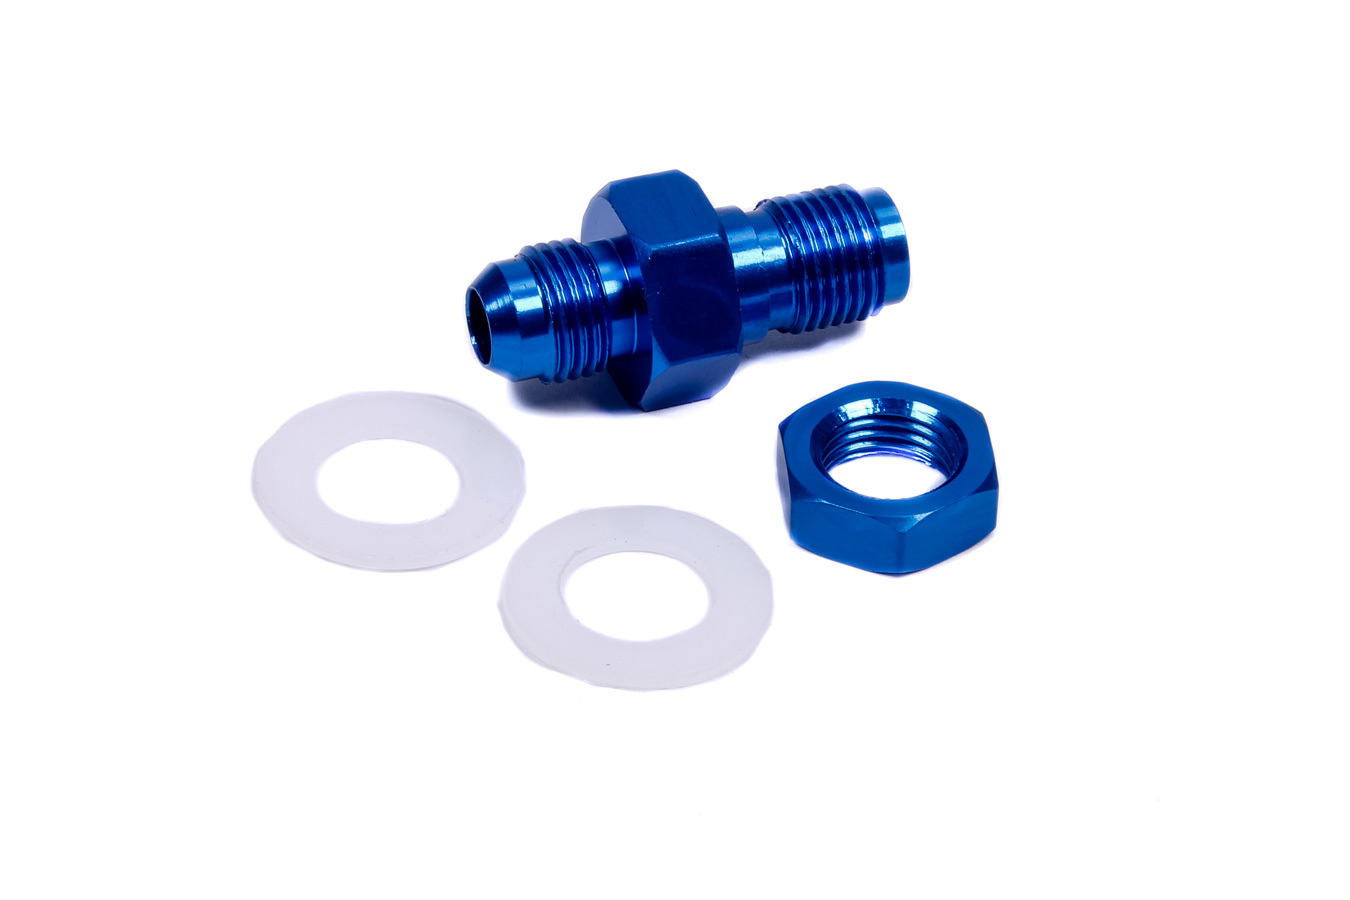 JAZ Products 832-106-11 Fitting, Bulkhead, Straight, 6 AN Male to 6 AN Male Bulkhead, PTFE Gaskets Included, Aluminum, Blue Anodized, JAZ Fast Flow Fuel Cells, Each